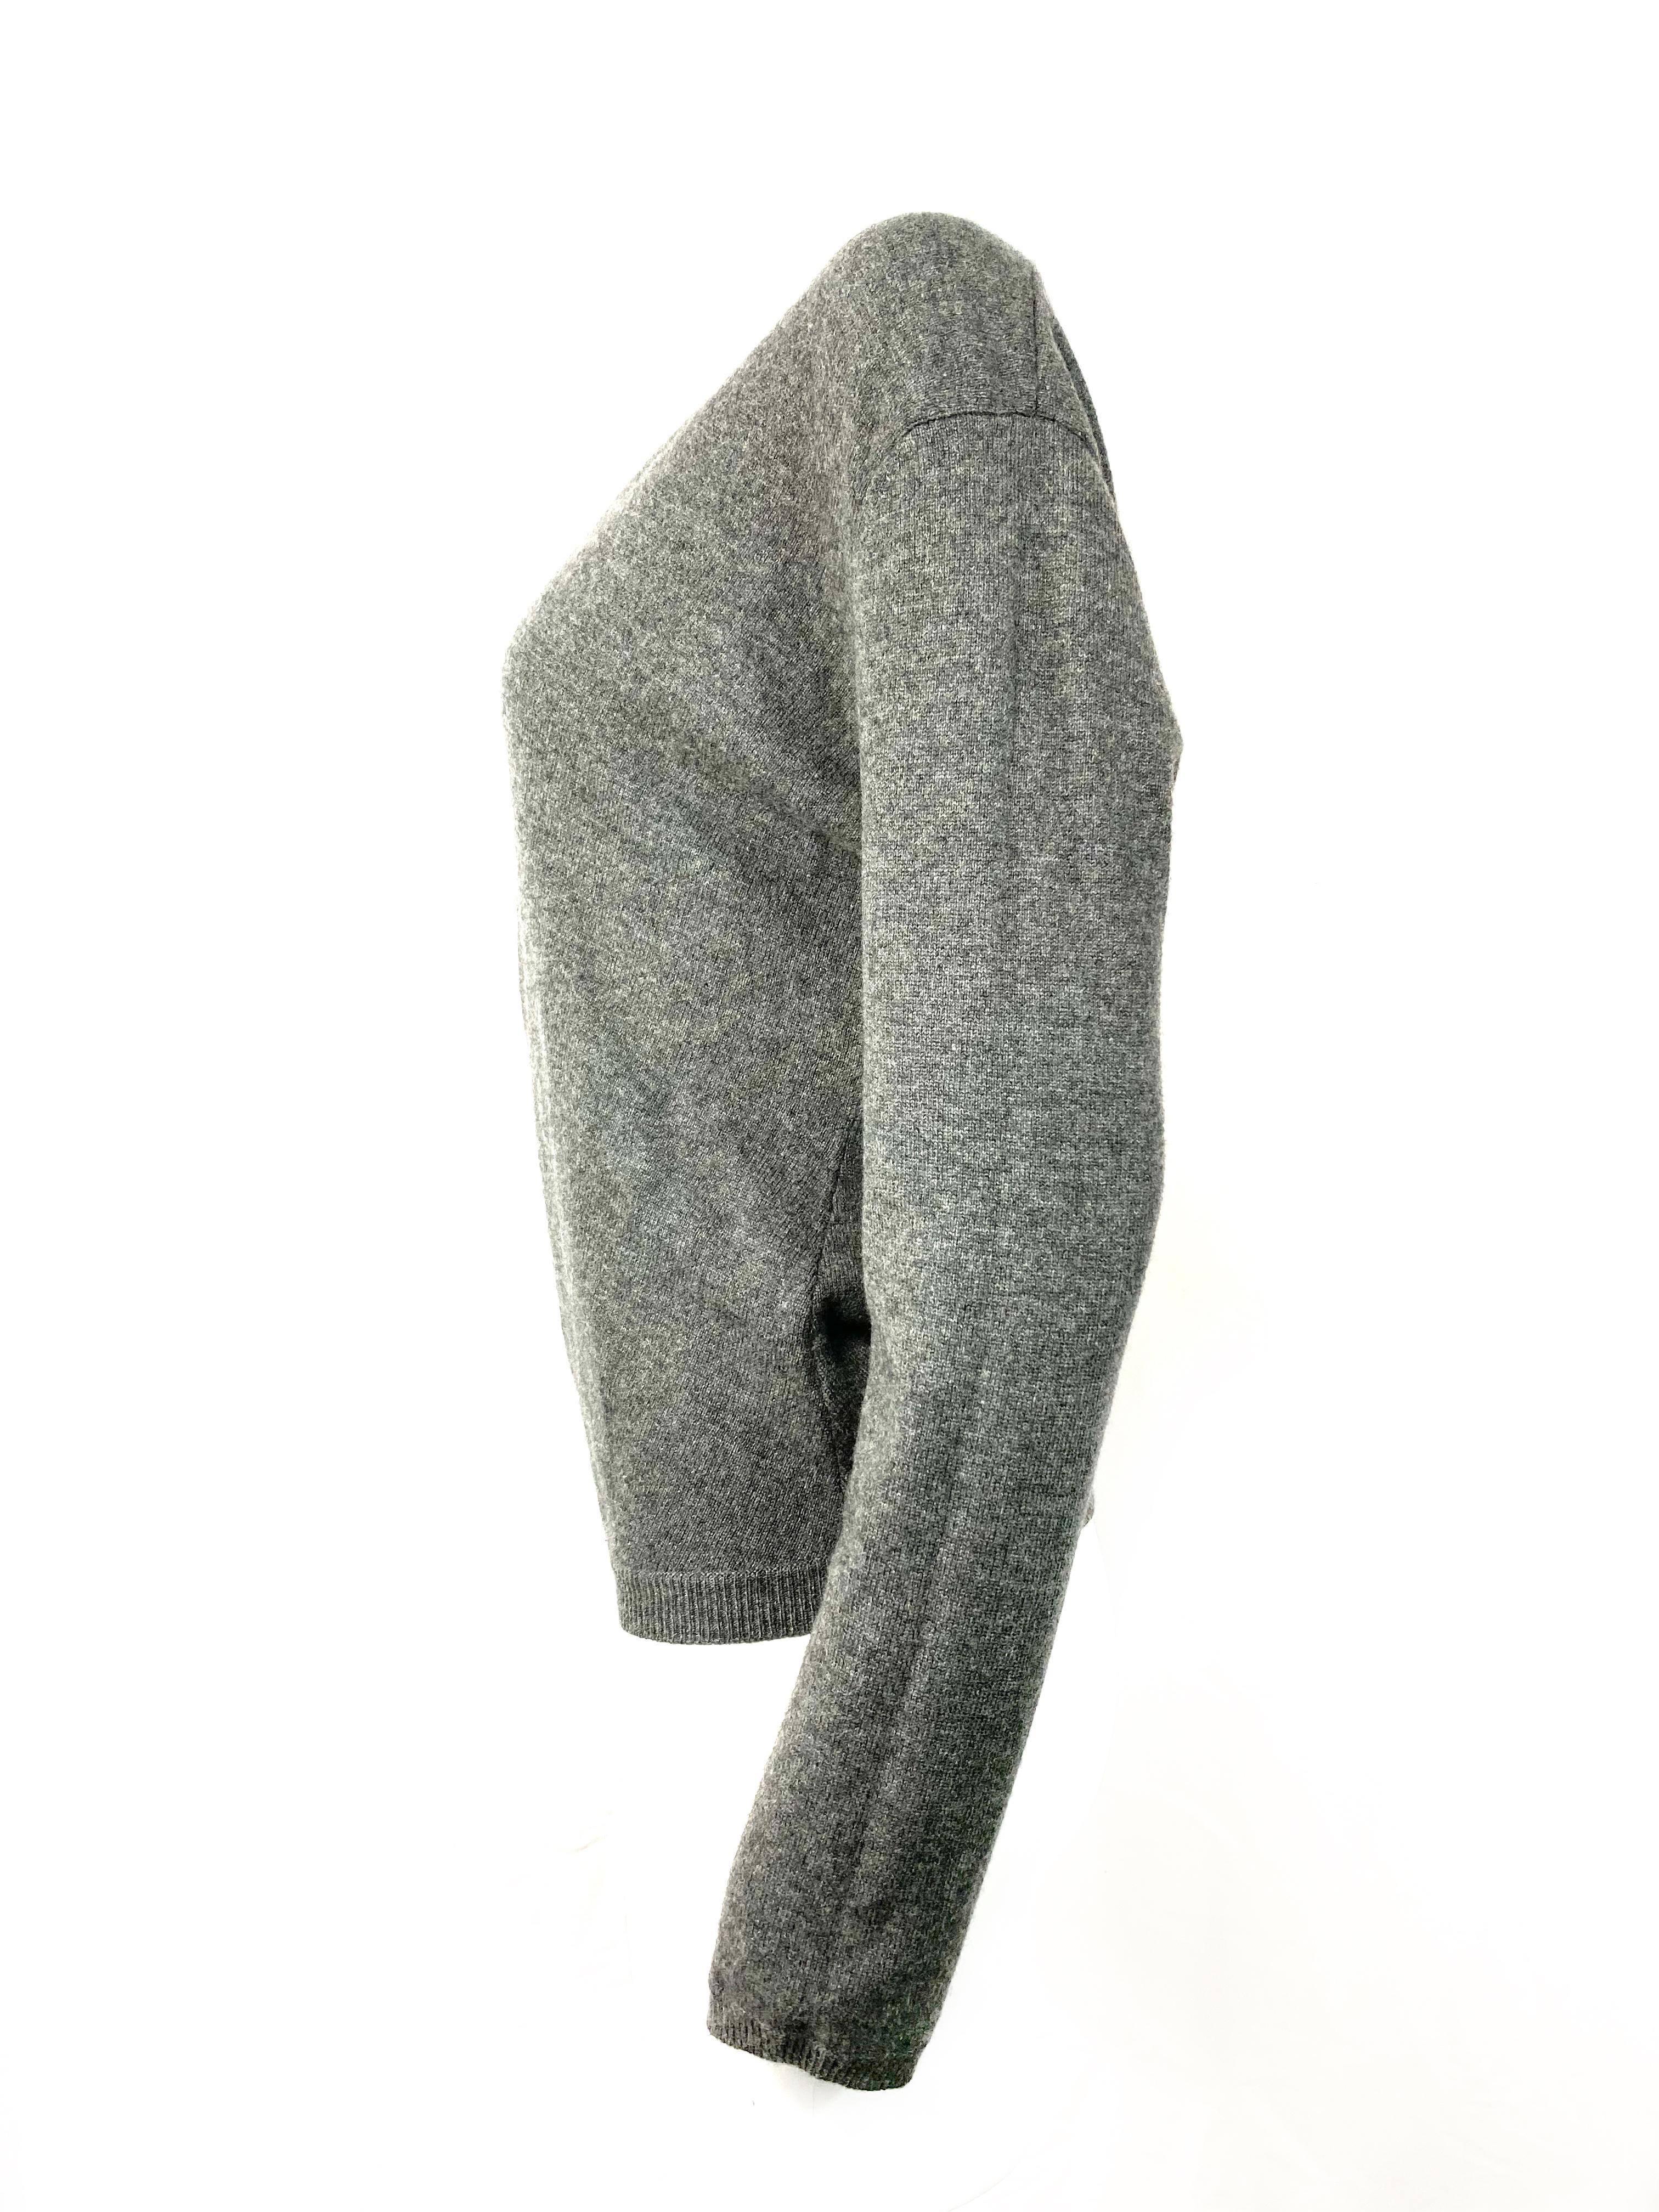 Barbara Bui Grey Cashmere Long Sleeves Pullover Sweater Size S  In Excellent Condition For Sale In Beverly Hills, CA